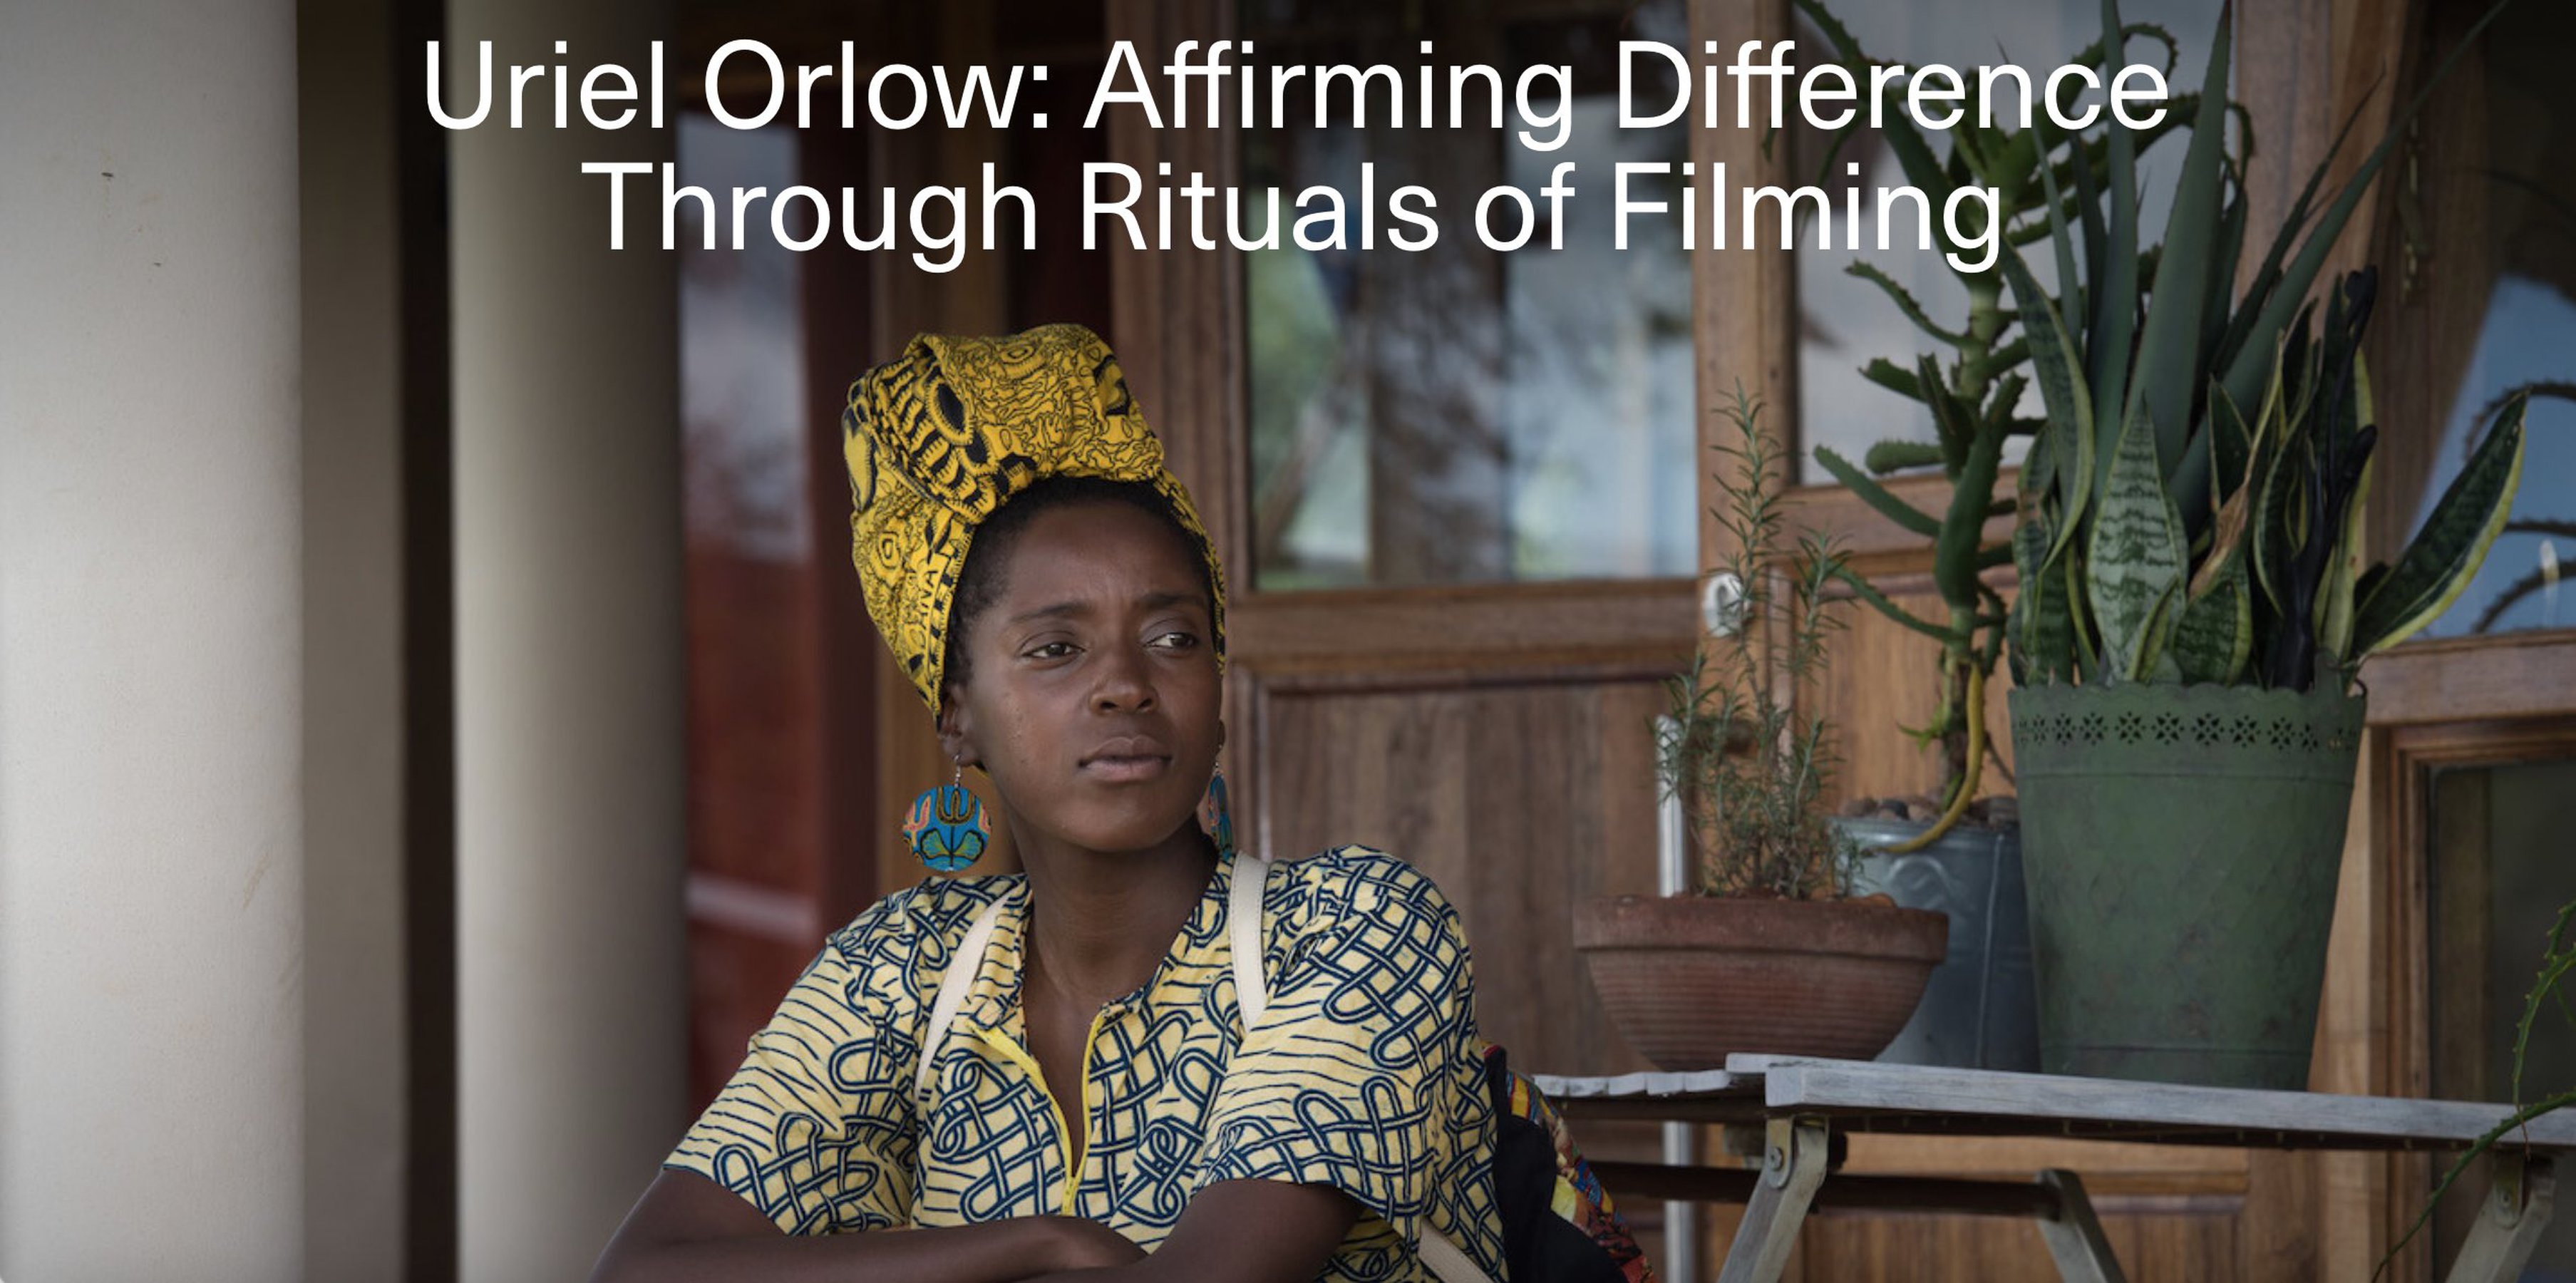 Uriel Orlow: Affirming difference through rituals of filming